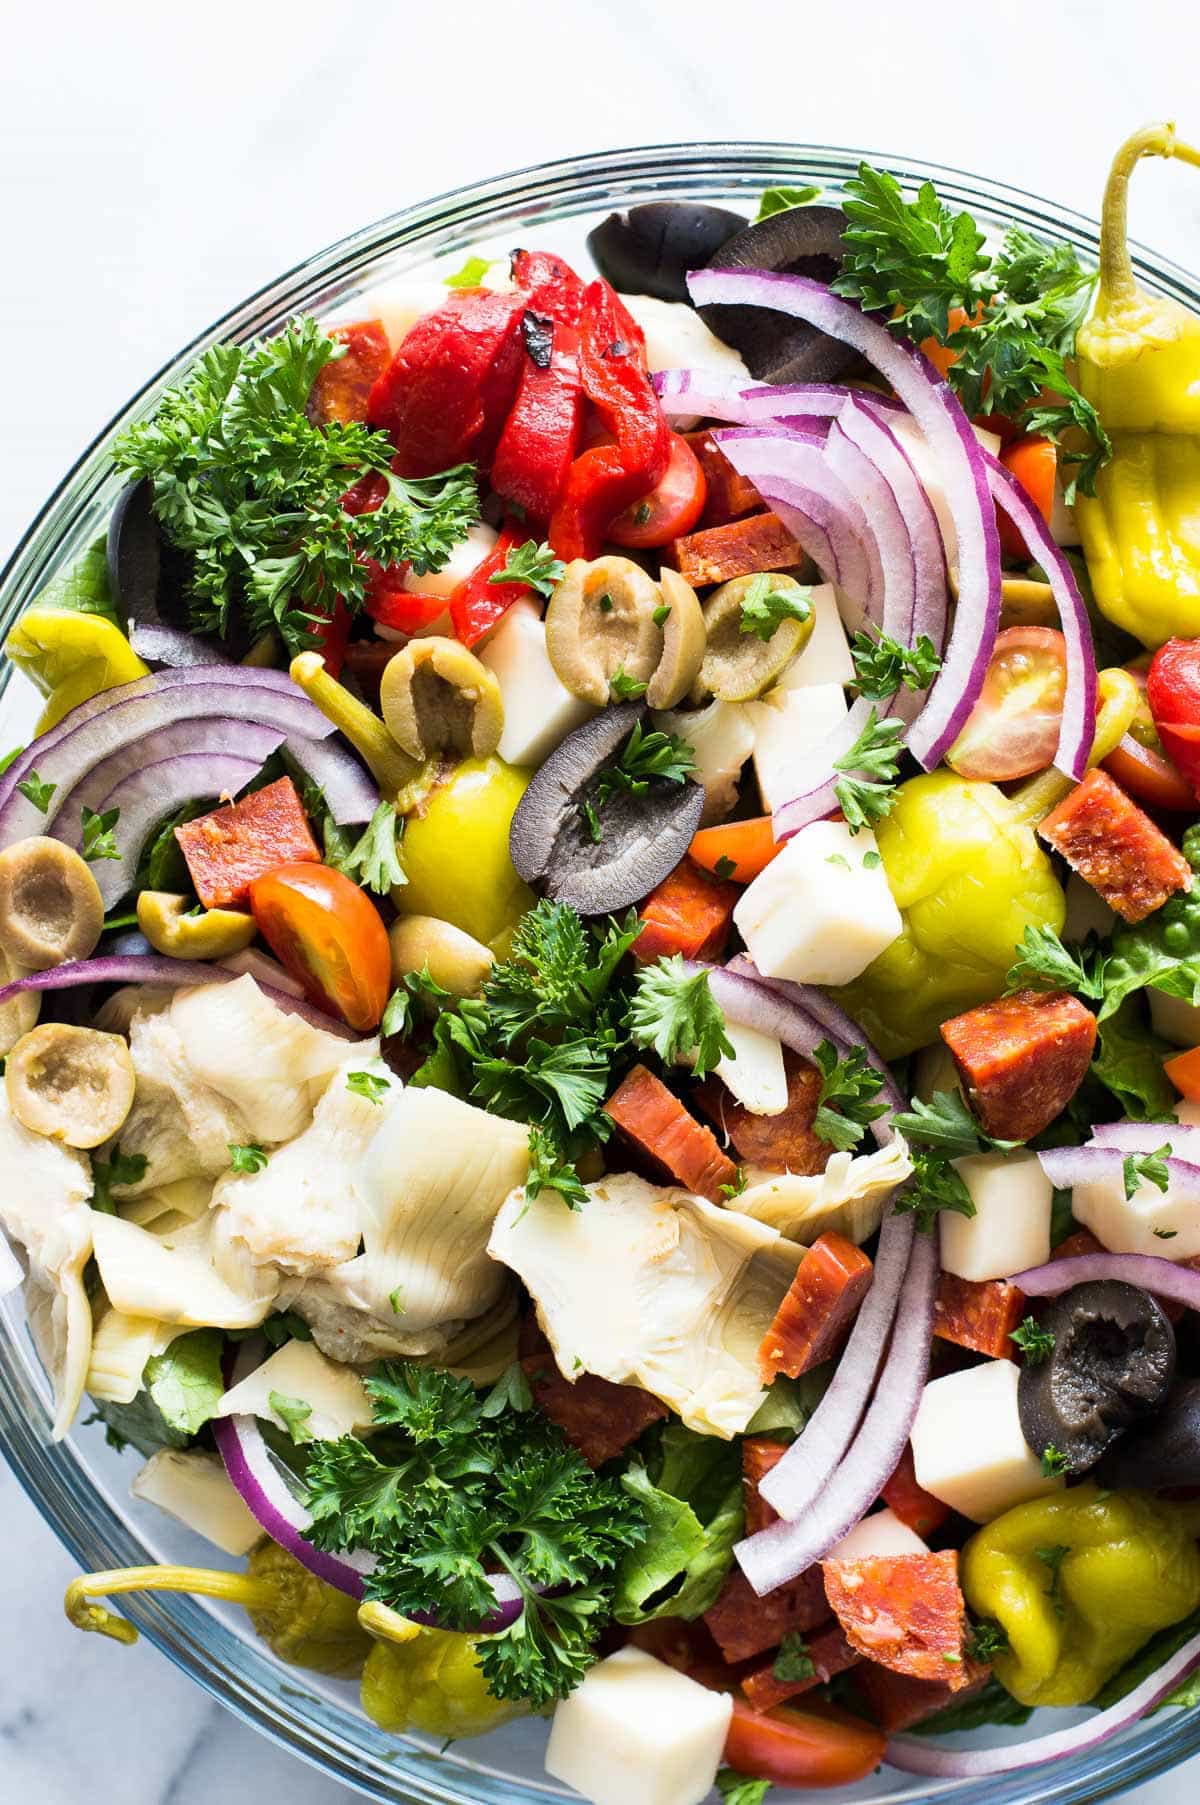 Antipasto Salad! The perfect side dish to go along with your Italian meals, loaded with artichoke hearts, roasted red peppers, olives, pepperoni, and fresh mozzarella! Not to mention drizzled with an easy to make vinaigrette made with pantry items! 